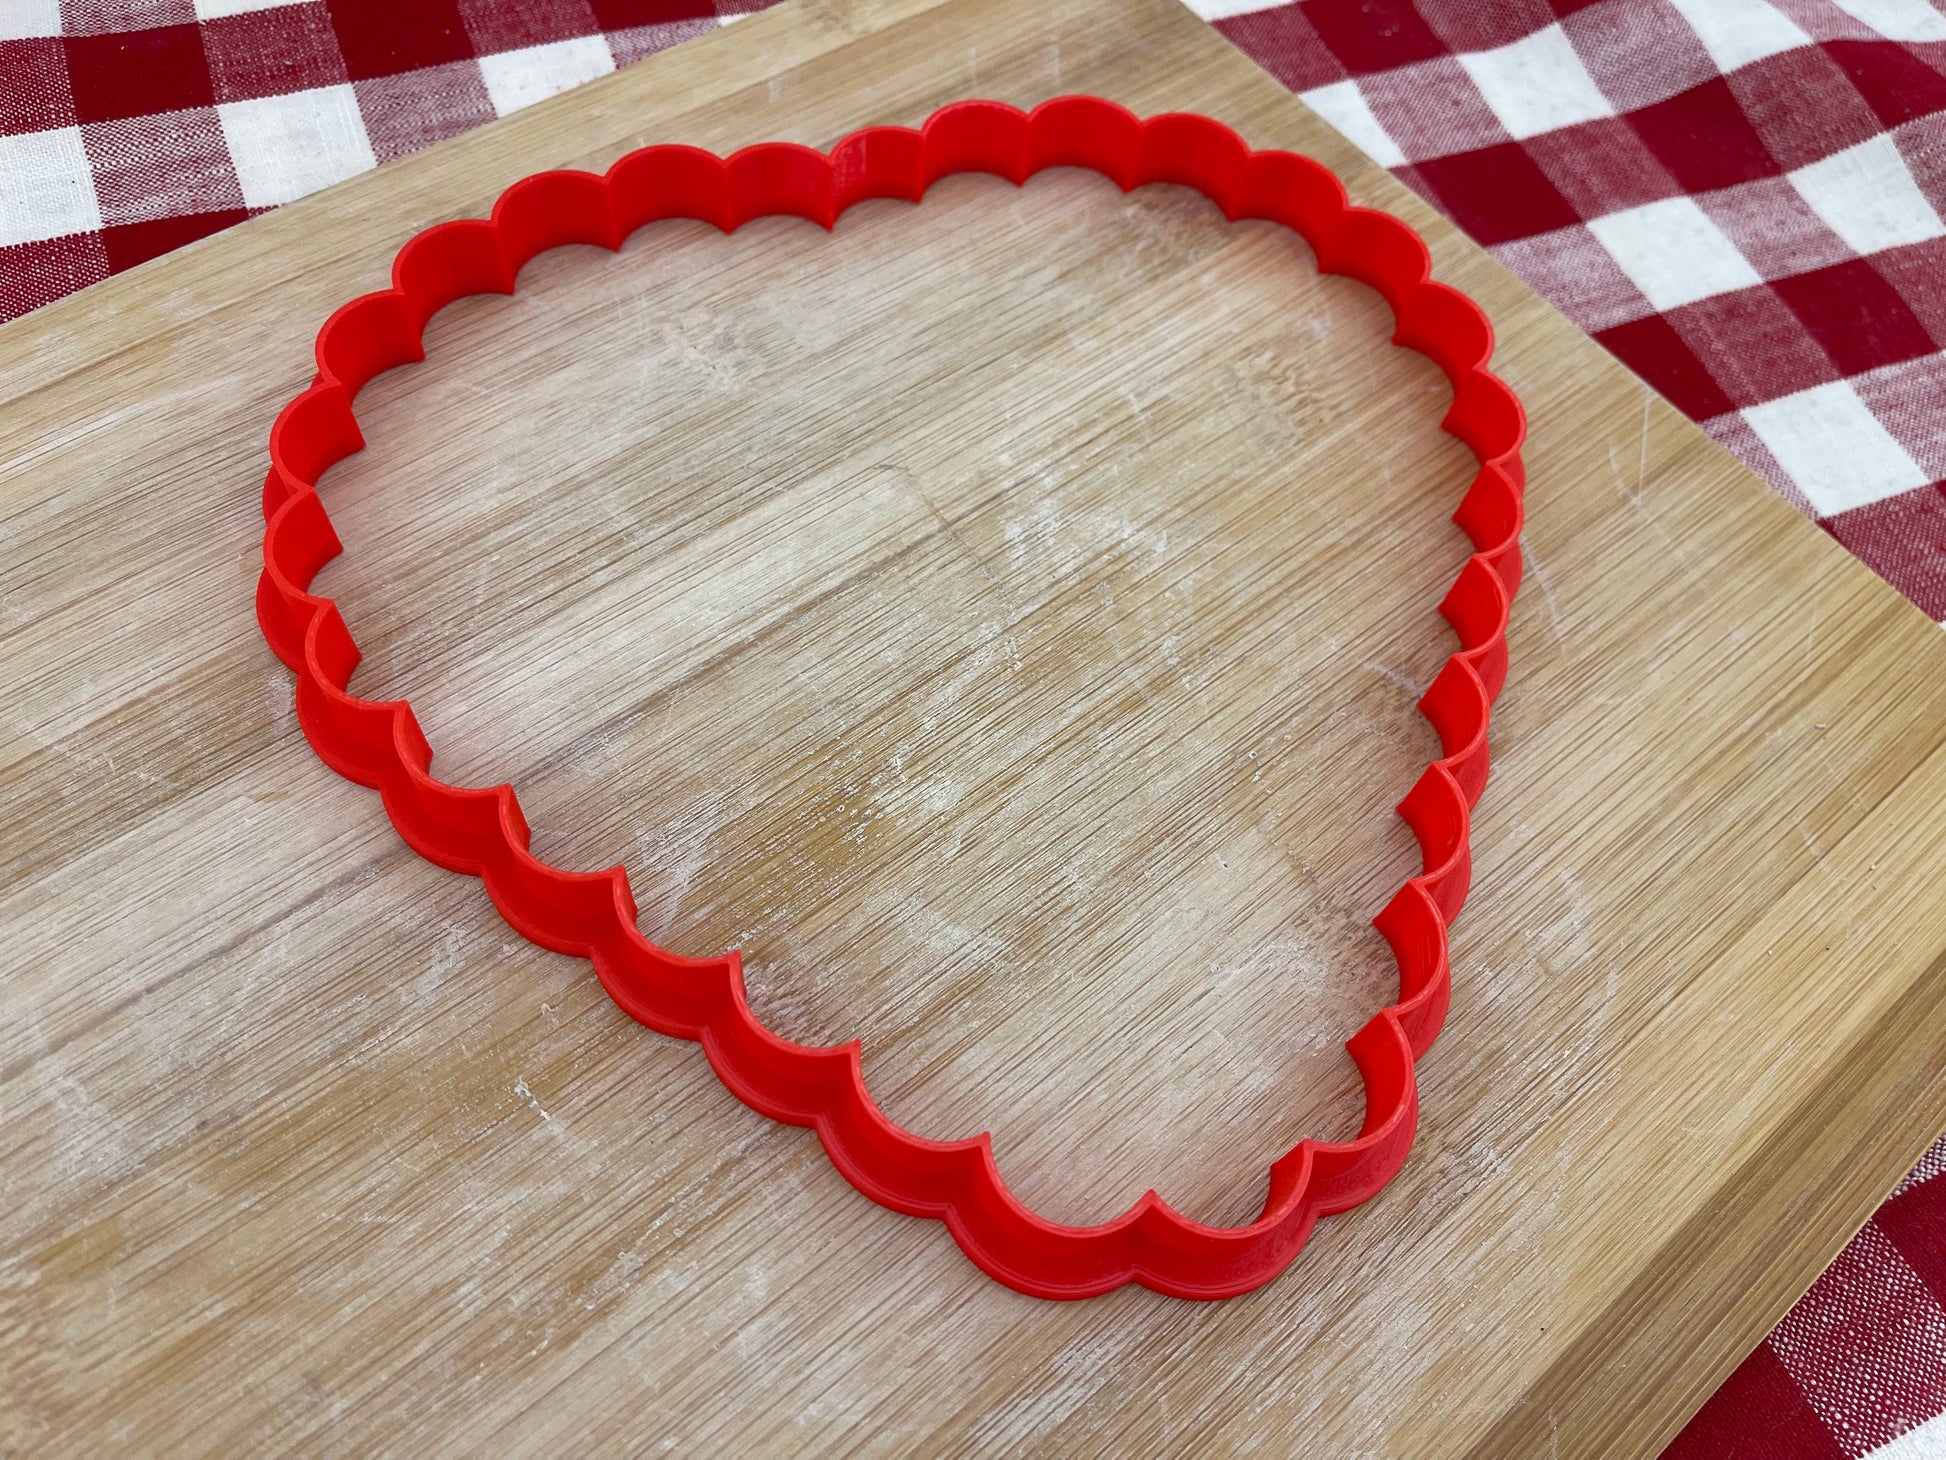 Plain Edge Heart Clay Cutter, made to match GR Pottery form